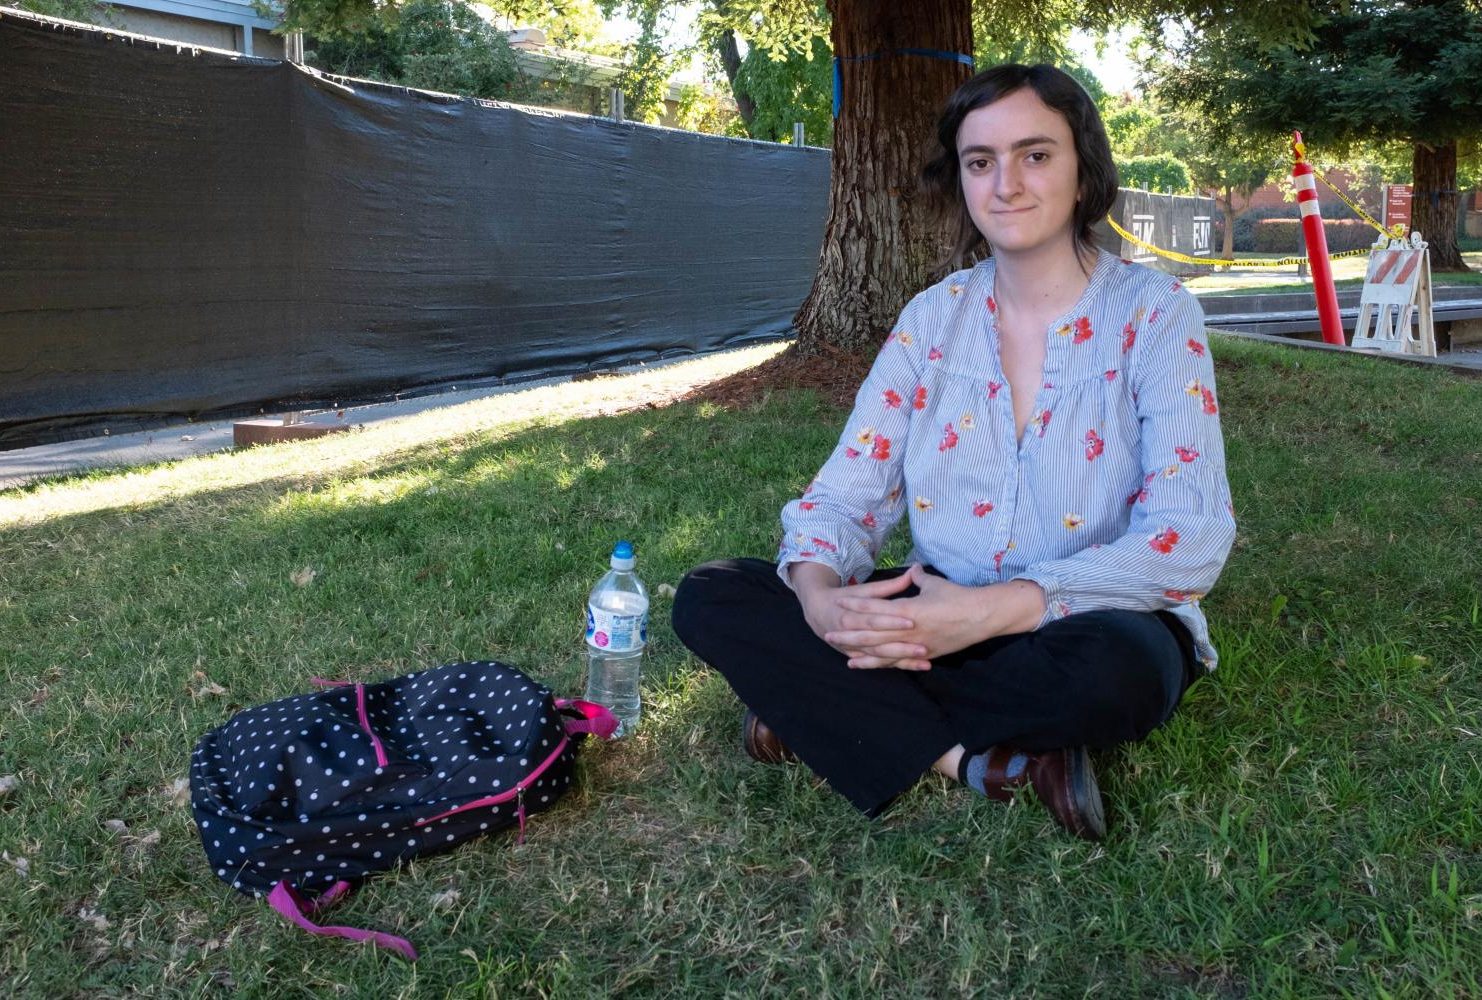 Undecided major, Cecily Cuny studies in the shade of a tree wearing a floral print shirt and black slacks at American River College on Sept. 6. “I like flower print shirts, loose things since it’s so hot out. Usually, I just go with what’s the most comfortable,” Cuny said. (Photo by Patrick Hyun Wilson)